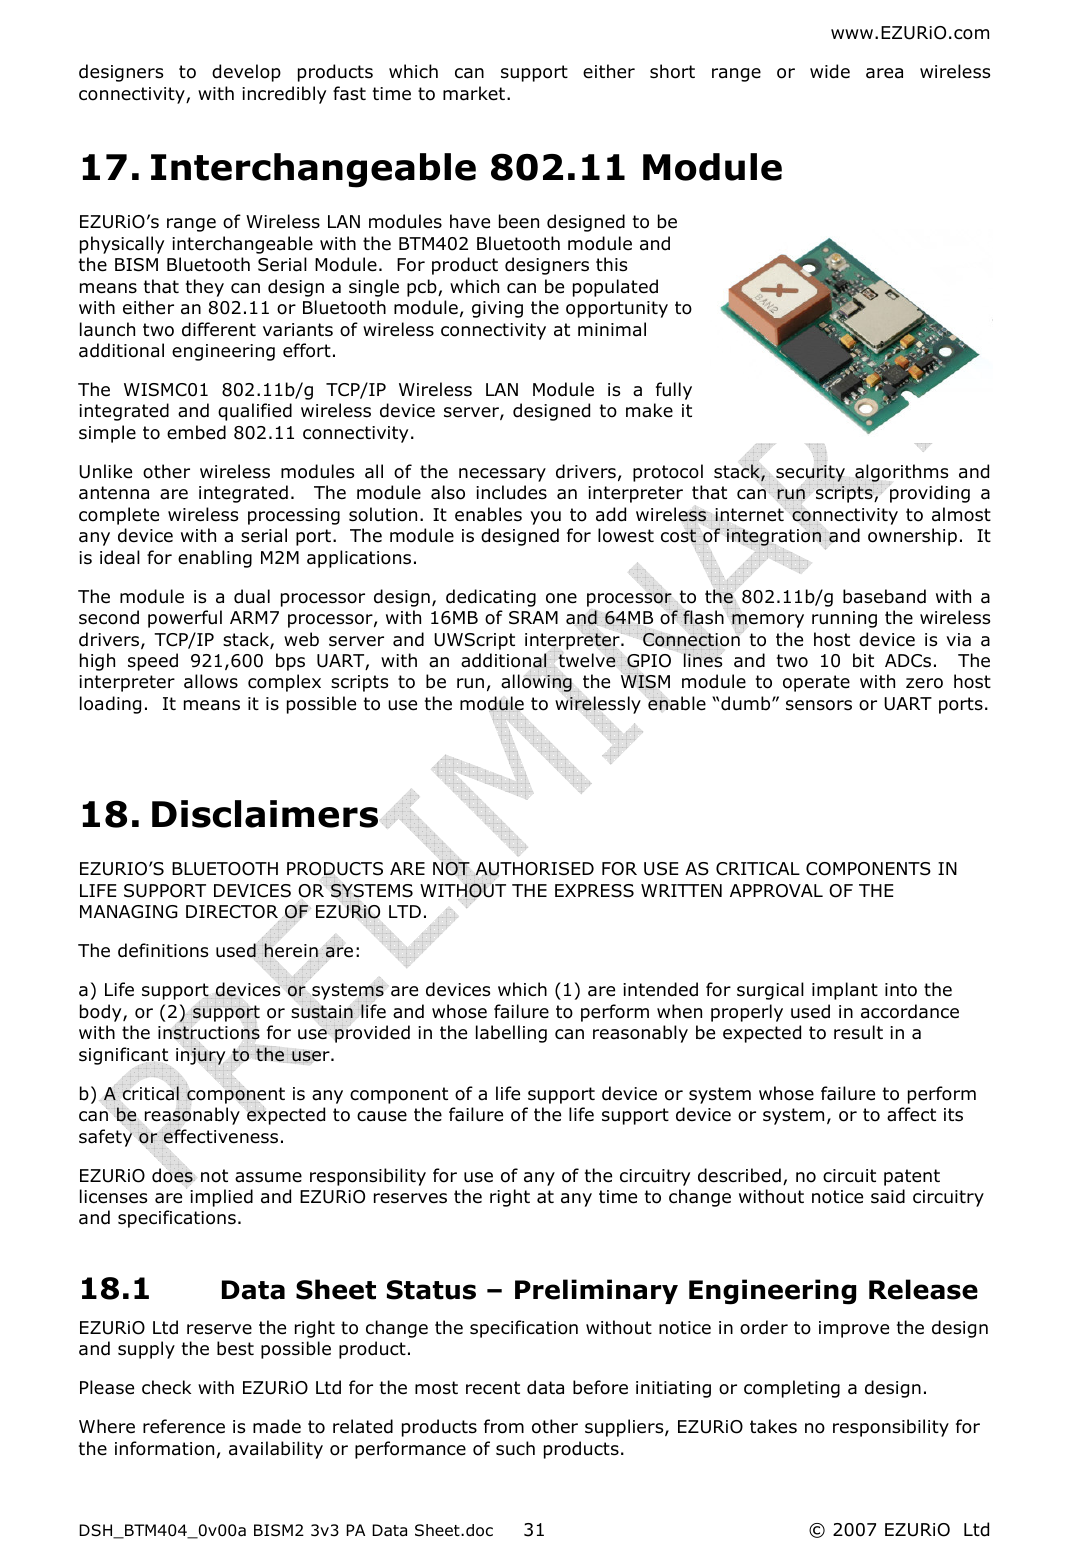 www.EZURiO.com DSH_BTM404_0v00a BISM2 3v3 PA Data Sheet.doc  © 2007 EZURiO  Ltd  31designers  to  develop  products  which  can  support  either  short  range  or  wide  area  wireless connectivity, with incredibly fast time to market. 17. Interchangeable 802.11 Module EZURiO’s range of Wireless LAN modules have been designed to be physically interchangeable with the BTM402 Bluetooth module and the BISM Bluetooth Serial Module.  For product designers this means that they can design a single pcb, which can be populated with either an 802.11 or Bluetooth module, giving the opportunity to launch two different variants of wireless connectivity at minimal additional engineering effort. The  WISMC01  802.11b/g  TCP/IP  Wireless  LAN  Module  is  a  fully integrated and qualified wireless device server, designed to make it simple to embed 802.11 connectivity.  Unlike  other  wireless  modules  all  of  the  necessary  drivers,  protocol  stack,  security  algorithms  and antenna  are  integrated.    The  module  also  includes  an  interpreter  that  can  run  scripts,  providing  a complete wireless processing solution. It enables you to add wireless internet connectivity to almost any device with a serial port.  The module is designed for lowest cost of integration and ownership.  It is ideal for enabling M2M applications. The module is a dual processor design, dedicating one processor to the 802.11b/g baseband with a second powerful ARM7 processor, with 16MB of SRAM and 64MB of flash memory running the wireless drivers,  TCP/IP  stack, web server and UWScript interpreter.   Connection  to  the  host device is via a high  speed  921,600  bps  UART,  with  an  additional  twelve  GPIO  lines  and  two  10  bit  ADCs.    The interpreter  allows  complex  scripts  to  be  run,  allowing  the  WISM  module  to  operate  with  zero  host loading.  It means it is possible to use the module to wirelessly enable “dumb” sensors or UART ports.  18. Disclaimers EZURIO’S BLUETOOTH PRODUCTS ARE NOT AUTHORISED FOR USE AS CRITICAL COMPONENTS IN LIFE SUPPORT DEVICES OR SYSTEMS WITHOUT THE EXPRESS WRITTEN APPROVAL OF THE MANAGING DIRECTOR OF EZURiO LTD. The definitions used herein are: a) Life support devices or systems are devices which (1) are intended for surgical implant into the body, or (2) support or sustain life and whose failure to perform when properly used in accordance with the instructions for use provided in the labelling can reasonably be expected to result in a significant injury to the user. b) A critical component is any component of a life support device or system whose failure to perform can be reasonably expected to cause the failure of the life support device or system, or to affect its safety or effectiveness. EZURiO does not assume responsibility for use of any of the circuitry described, no circuit patent licenses are implied and EZURiO reserves the right at any time to change without notice said circuitry and specifications. 18.1 Data Sheet Status – Preliminary Engineering Release EZURiO Ltd reserve the right to change the specification without notice in order to improve the design and supply the best possible product. Please check with EZURiO Ltd for the most recent data before initiating or completing a design. Where reference is made to related products from other suppliers, EZURiO takes no responsibility for the information, availability or performance of such products.  